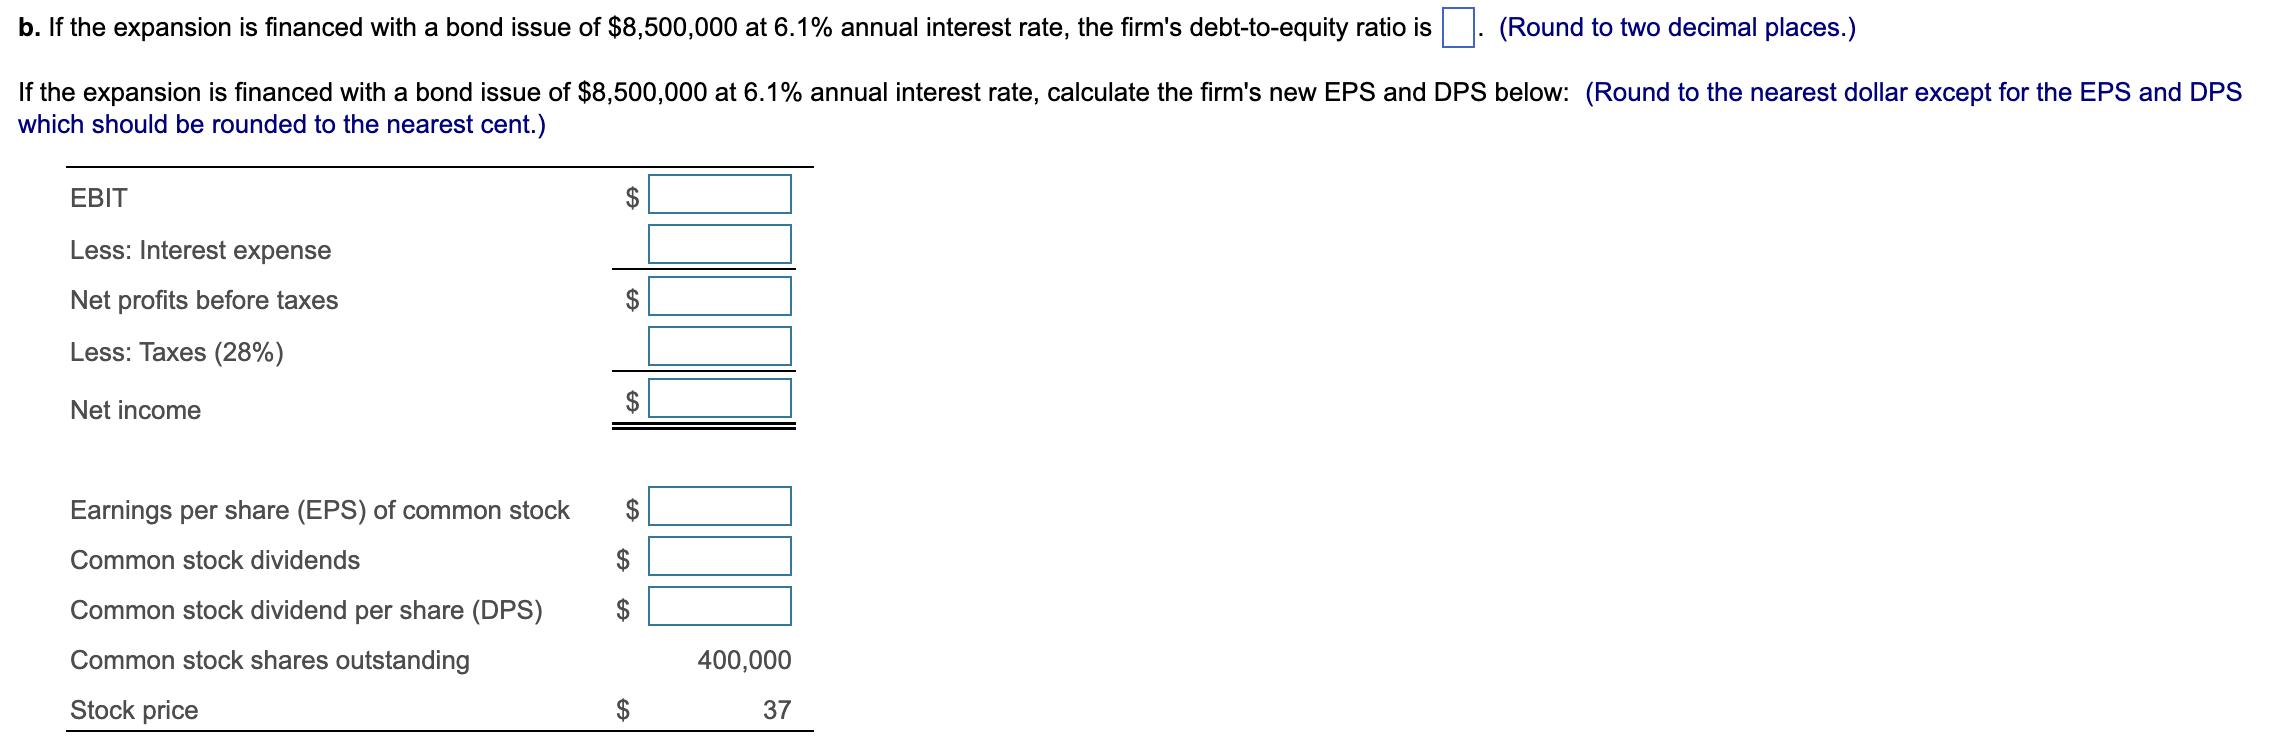 b. If the expansion is financed with a bond issue of $8,500,000 at 6.1% annual interest rate, the firm's